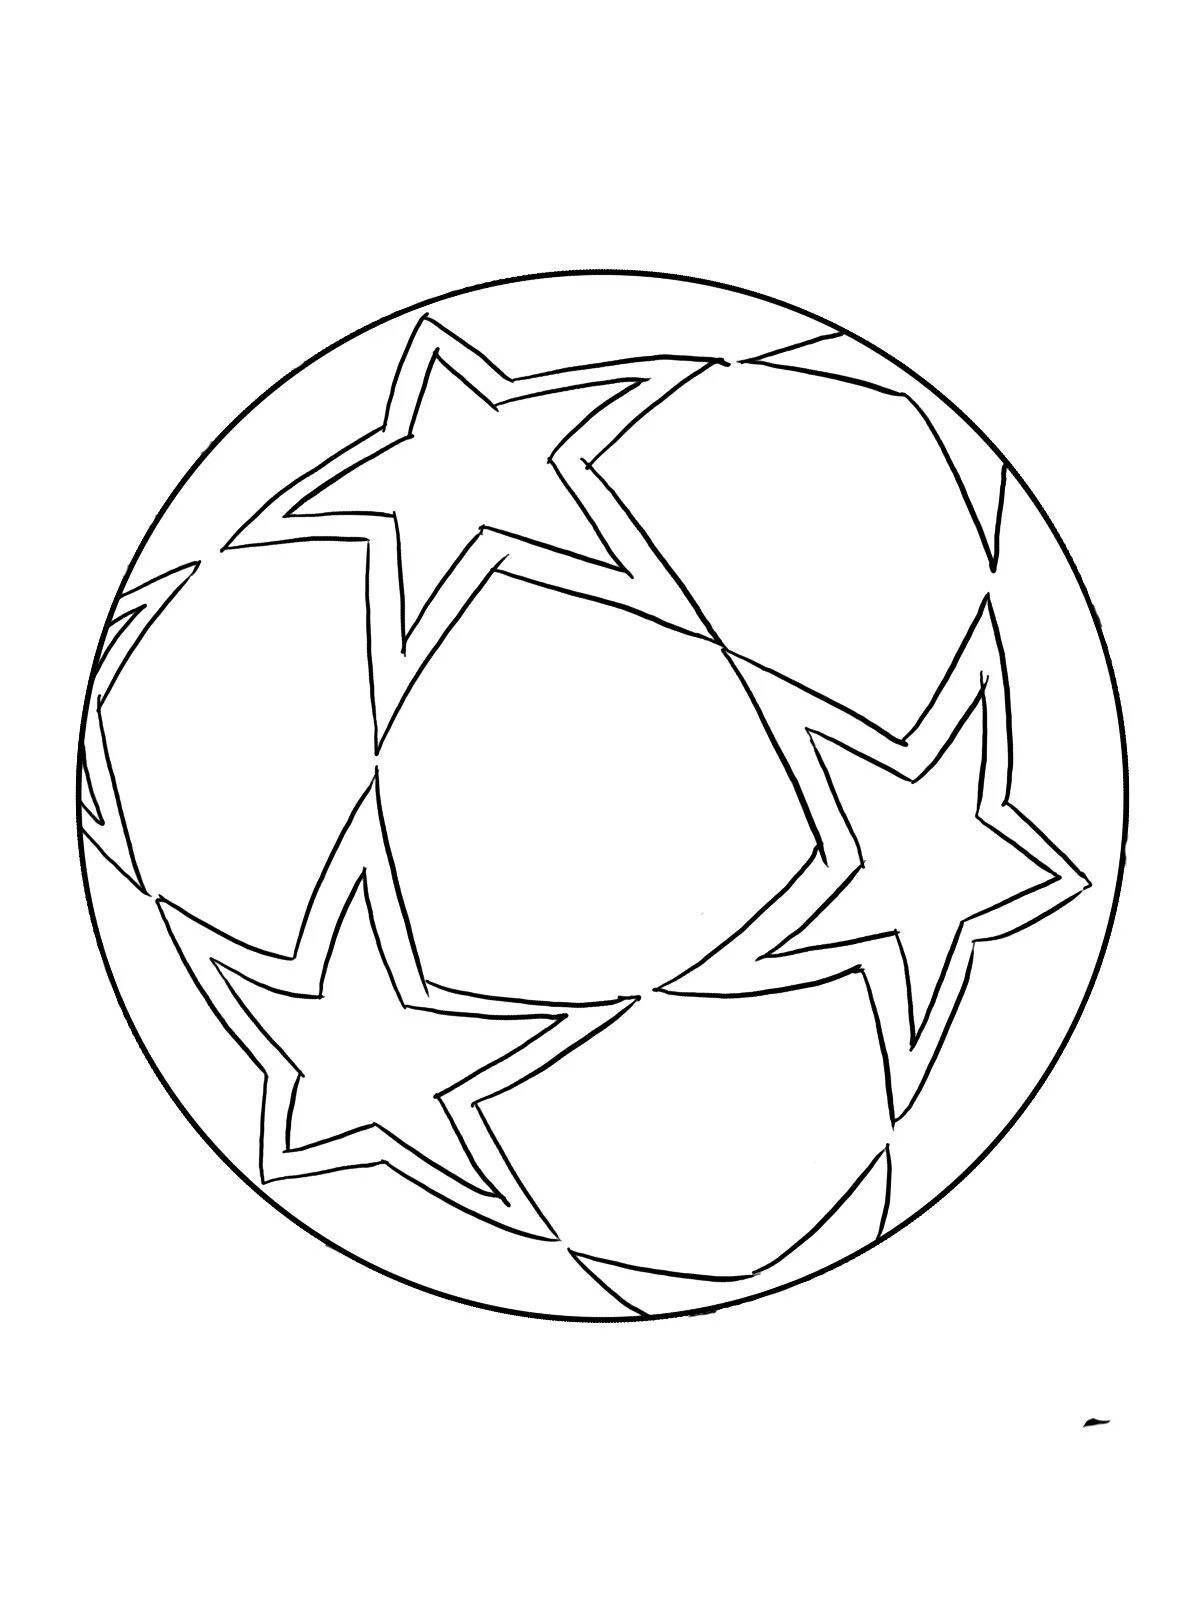 An entertaining coloring of a soccer ball for children